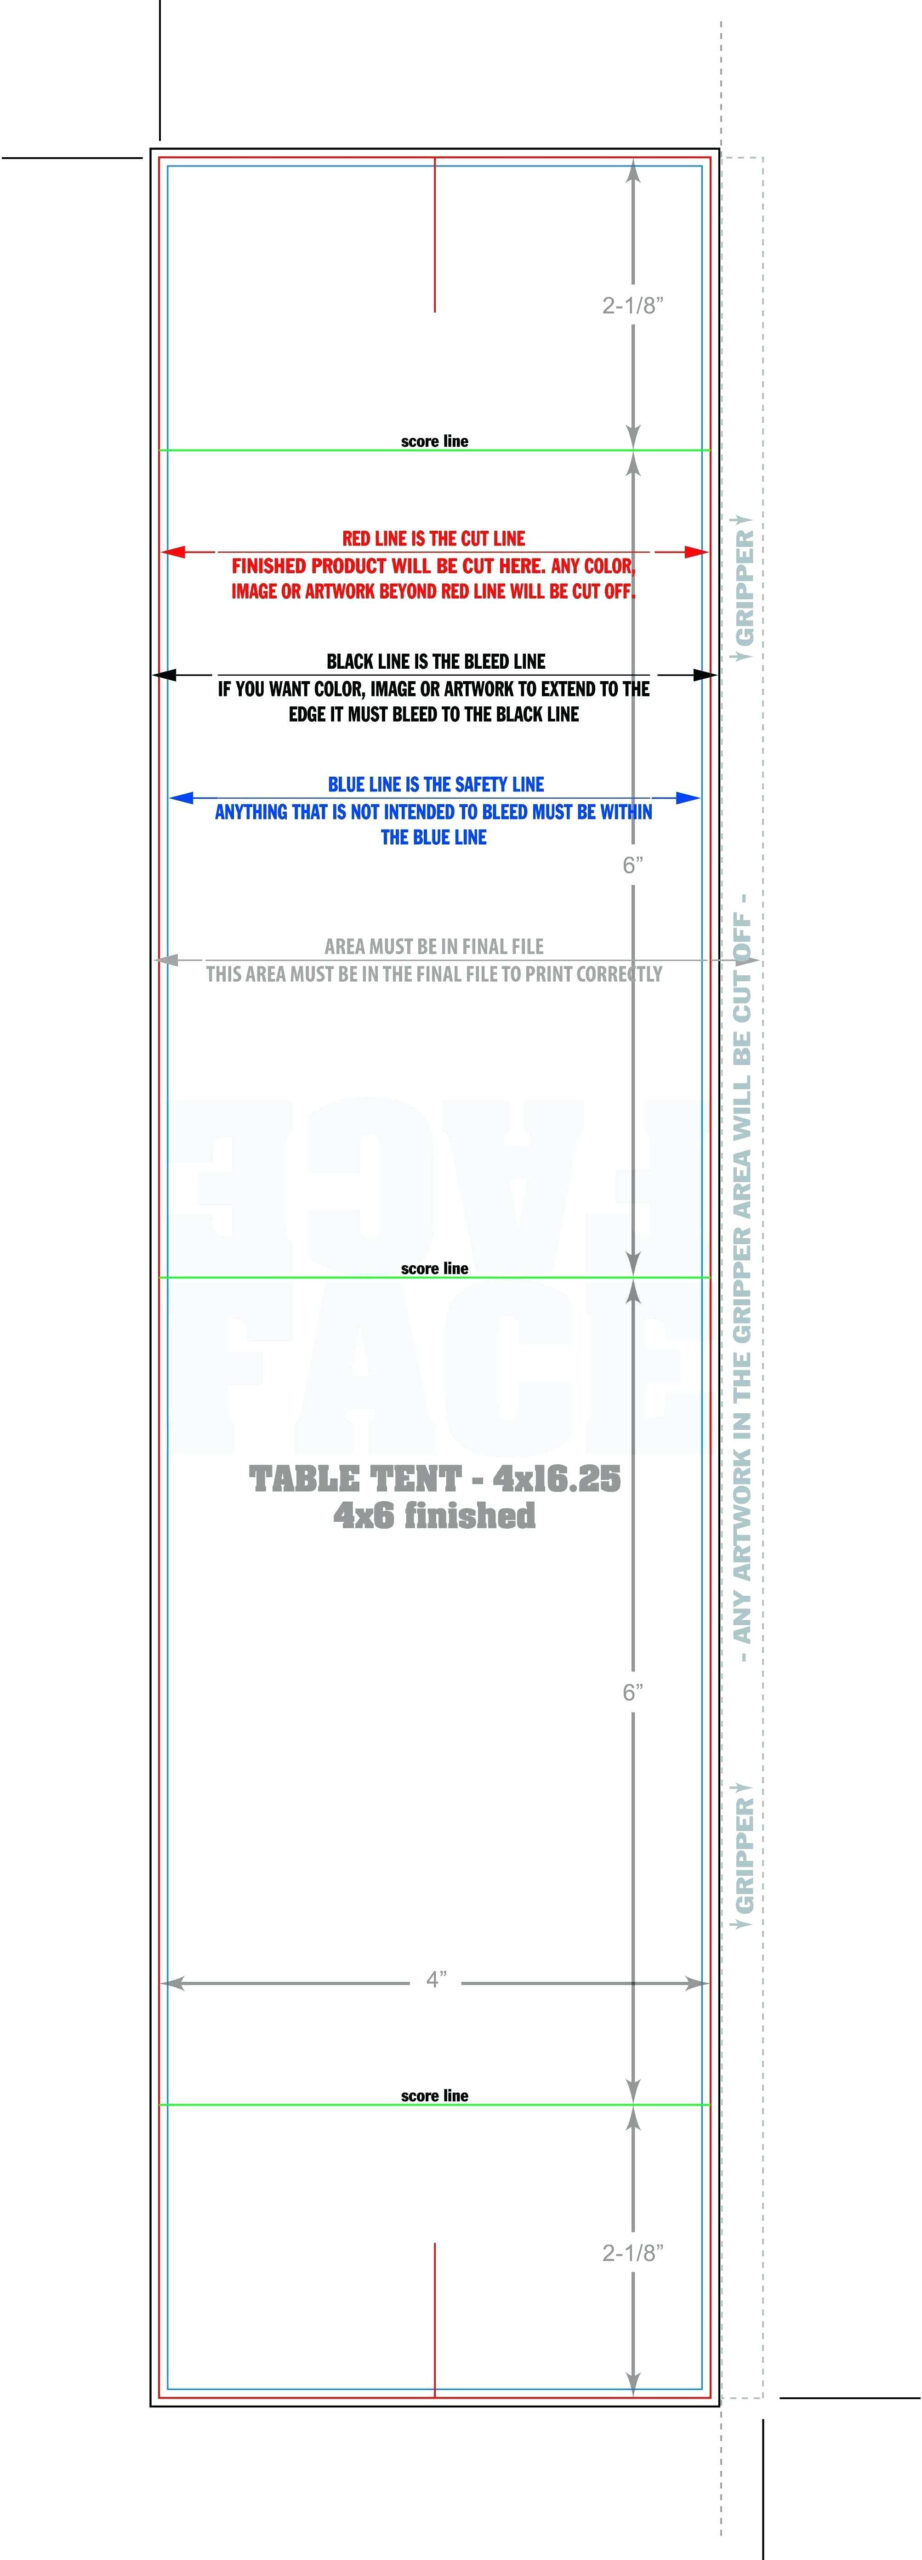 Table Tent Card Template - Zimer.bwong.co Inside Product Line Card Template Word